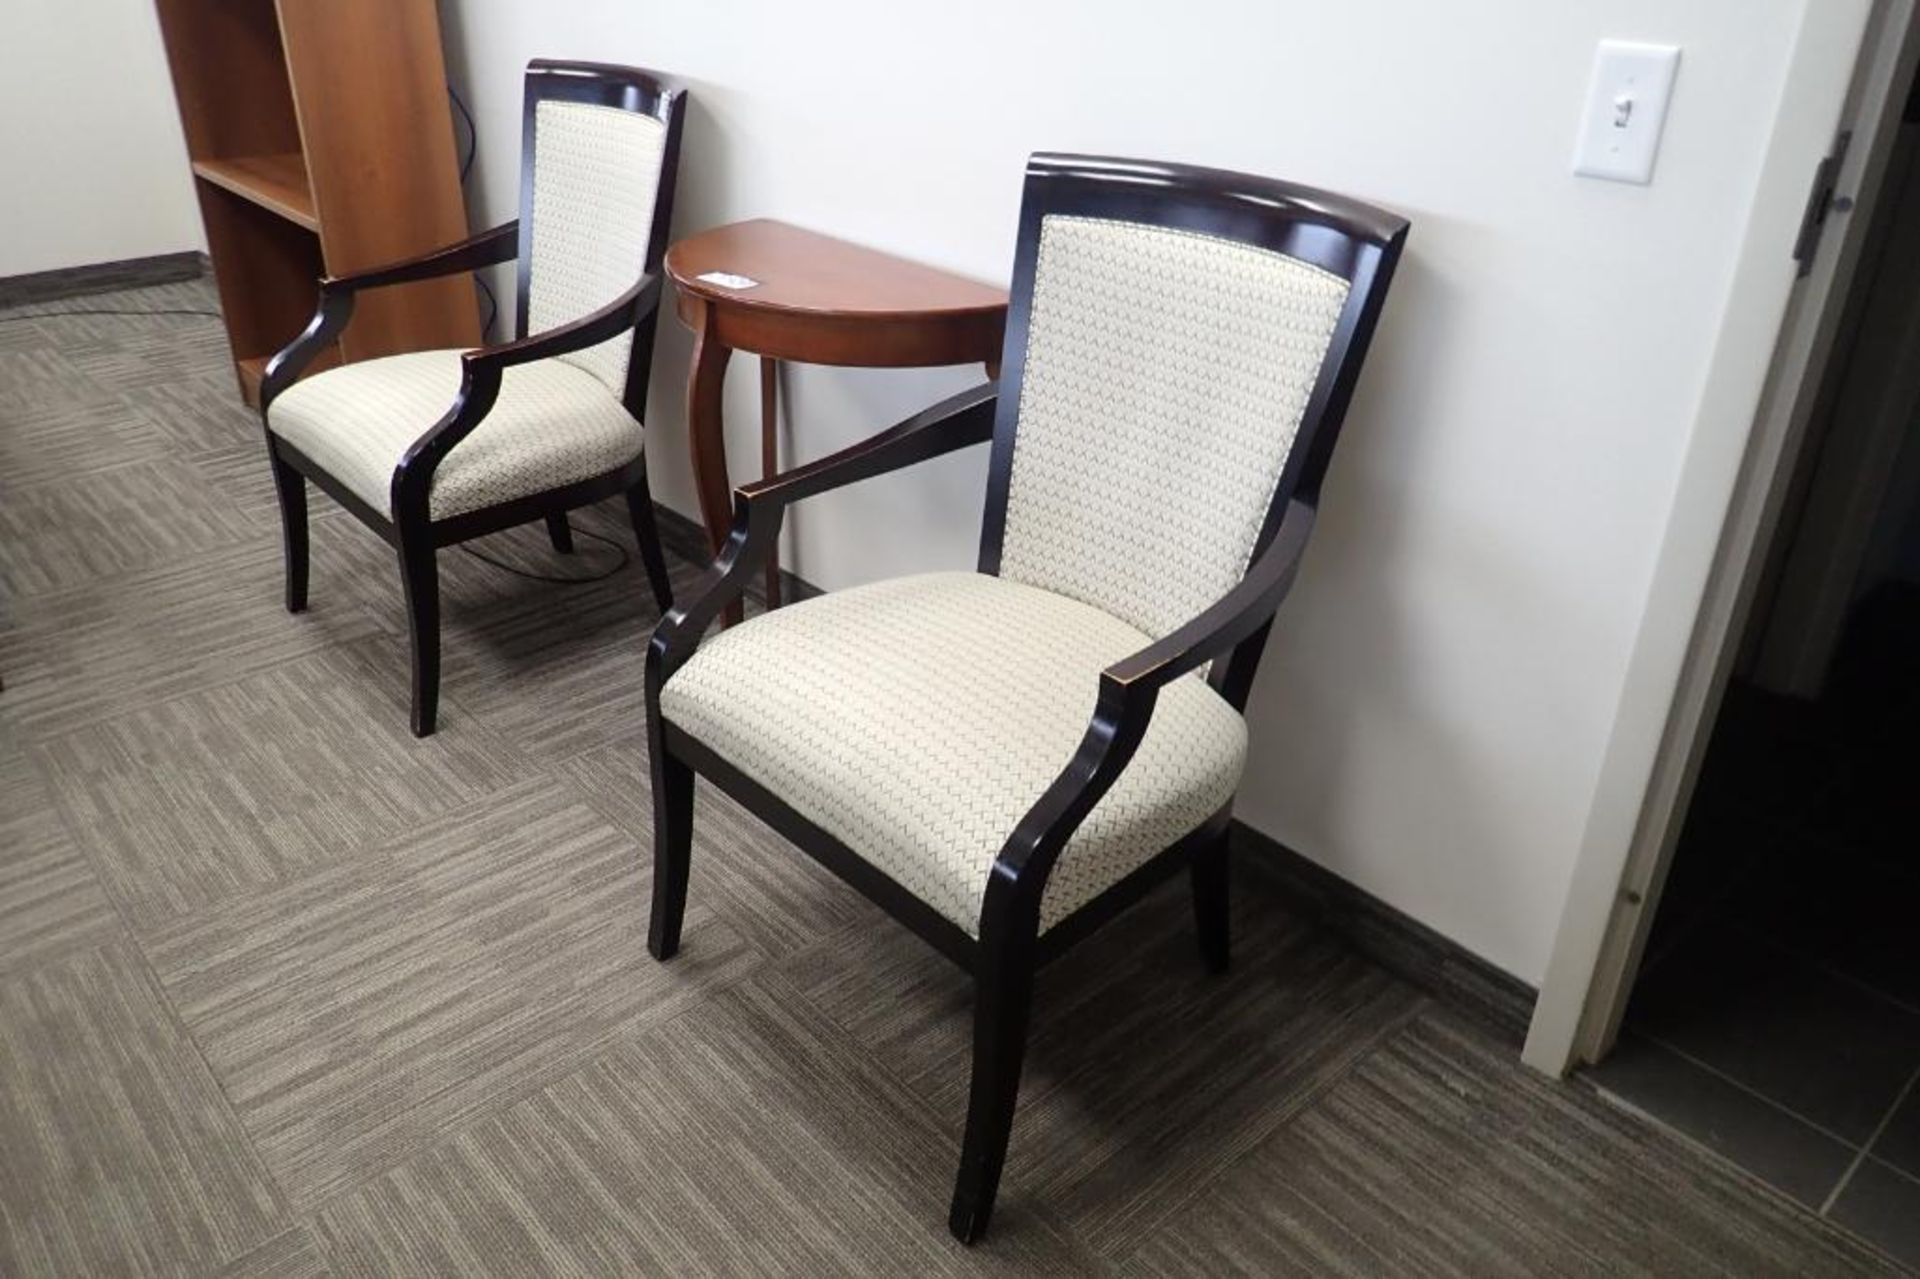 Lot of 2 High Back Upholstered Side Chairs.